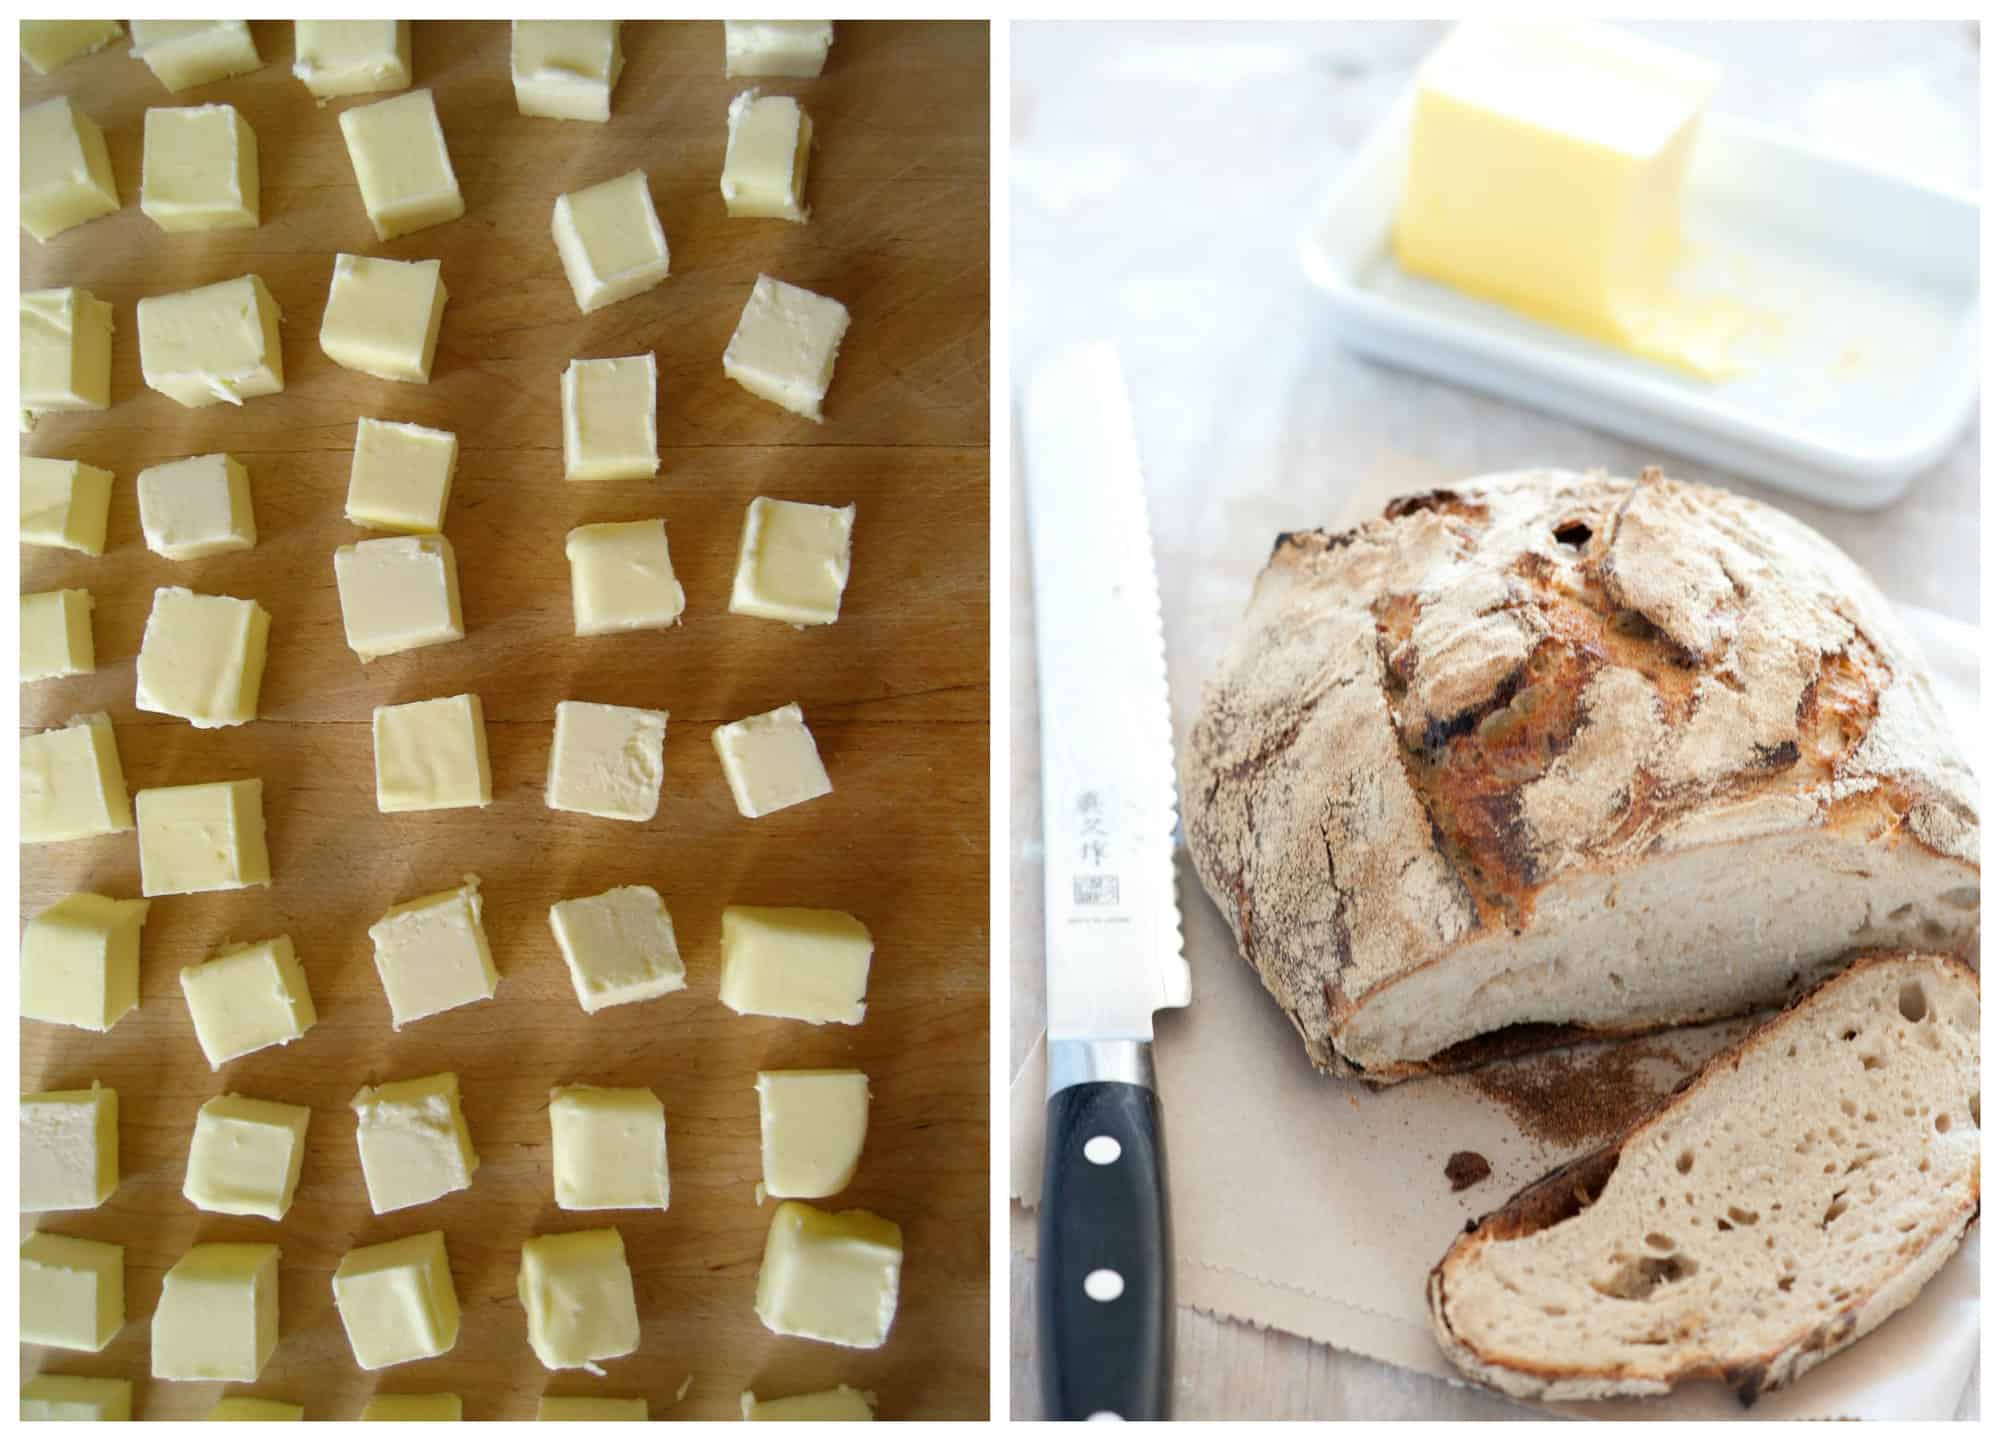 Left: Homemade little squares of butter on a cutting board. Right: A rustic loaf of bread with butter in a dish in the background.